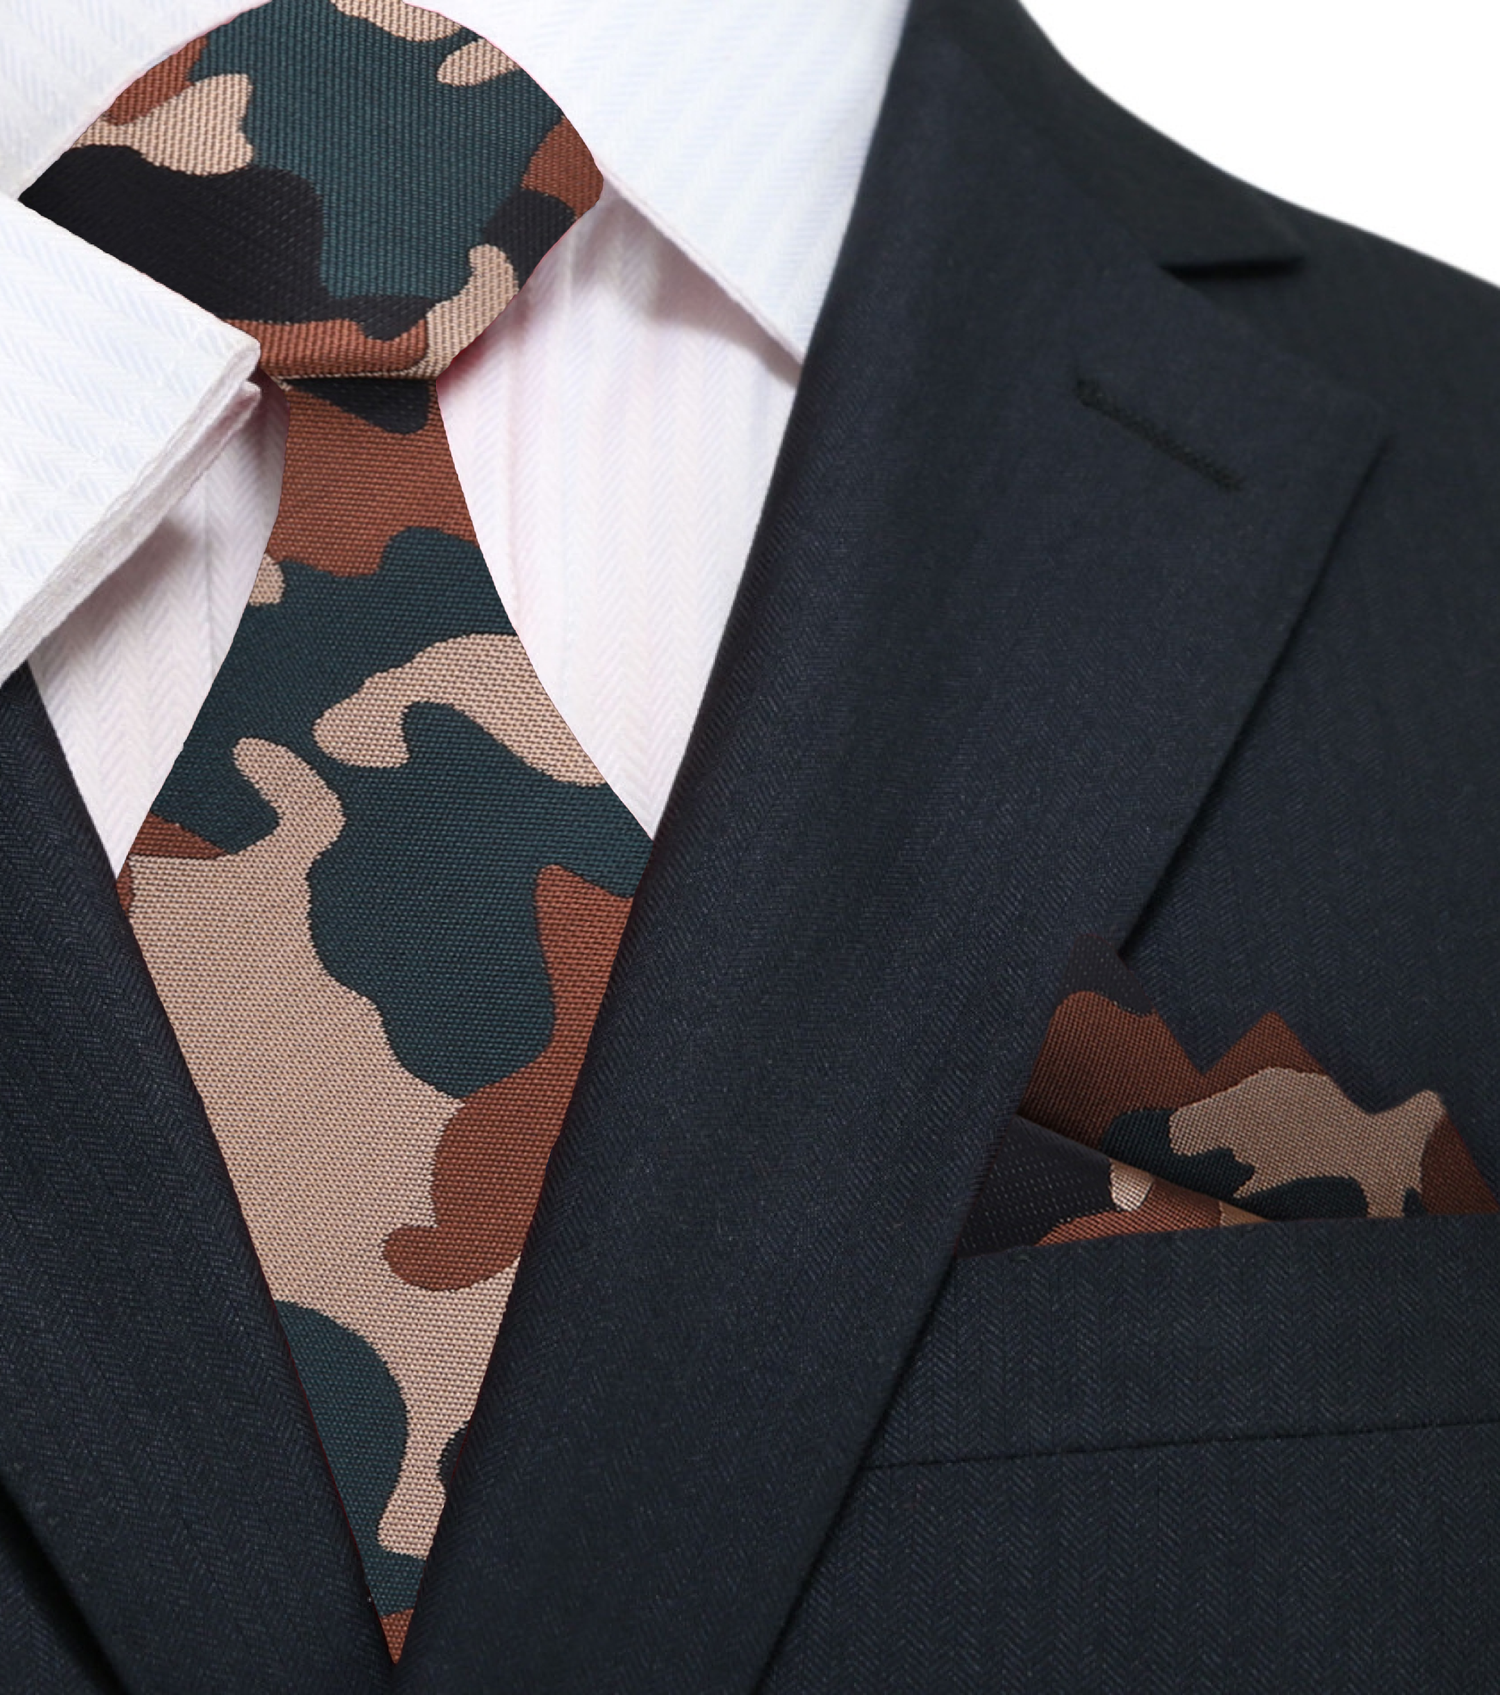 Brown, Black, Green Camouflage Necktie and Matching Square